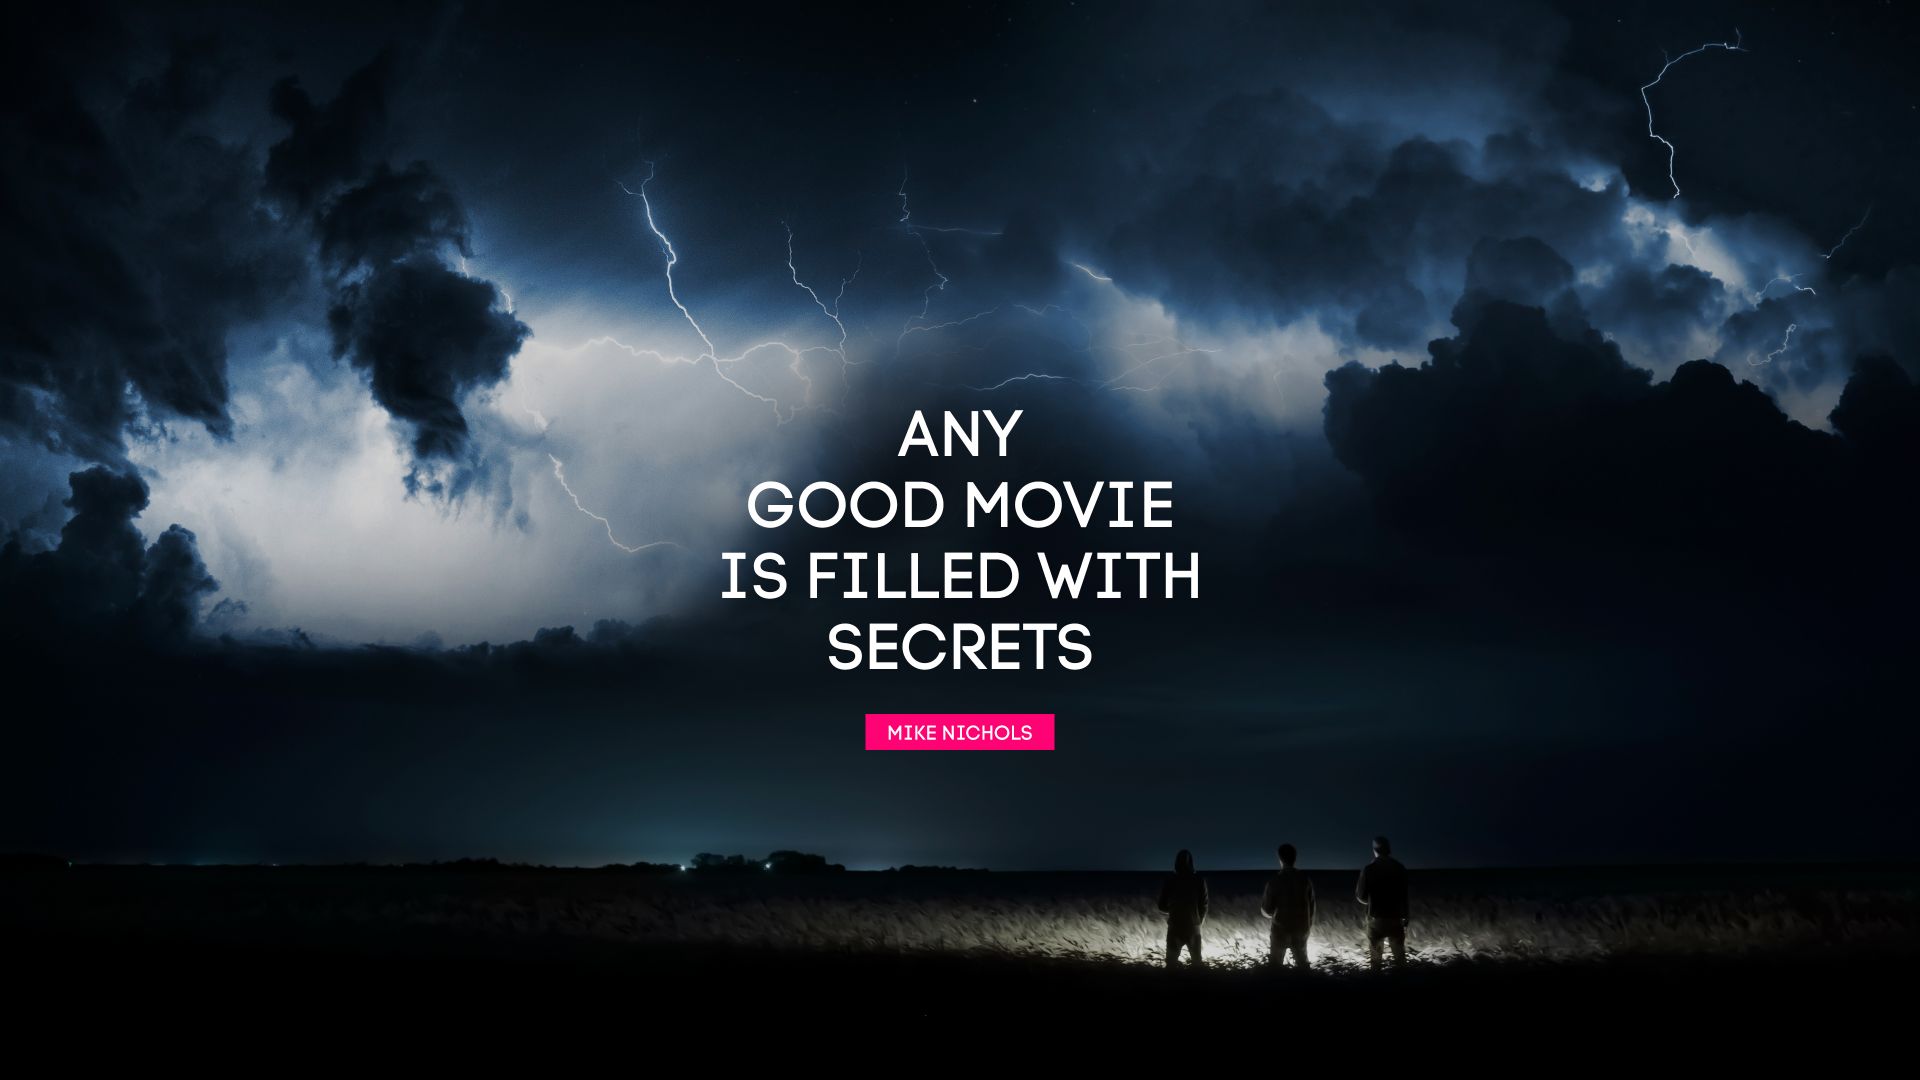 Any good movie is filled with secrets. - Quote by Mike Nichols